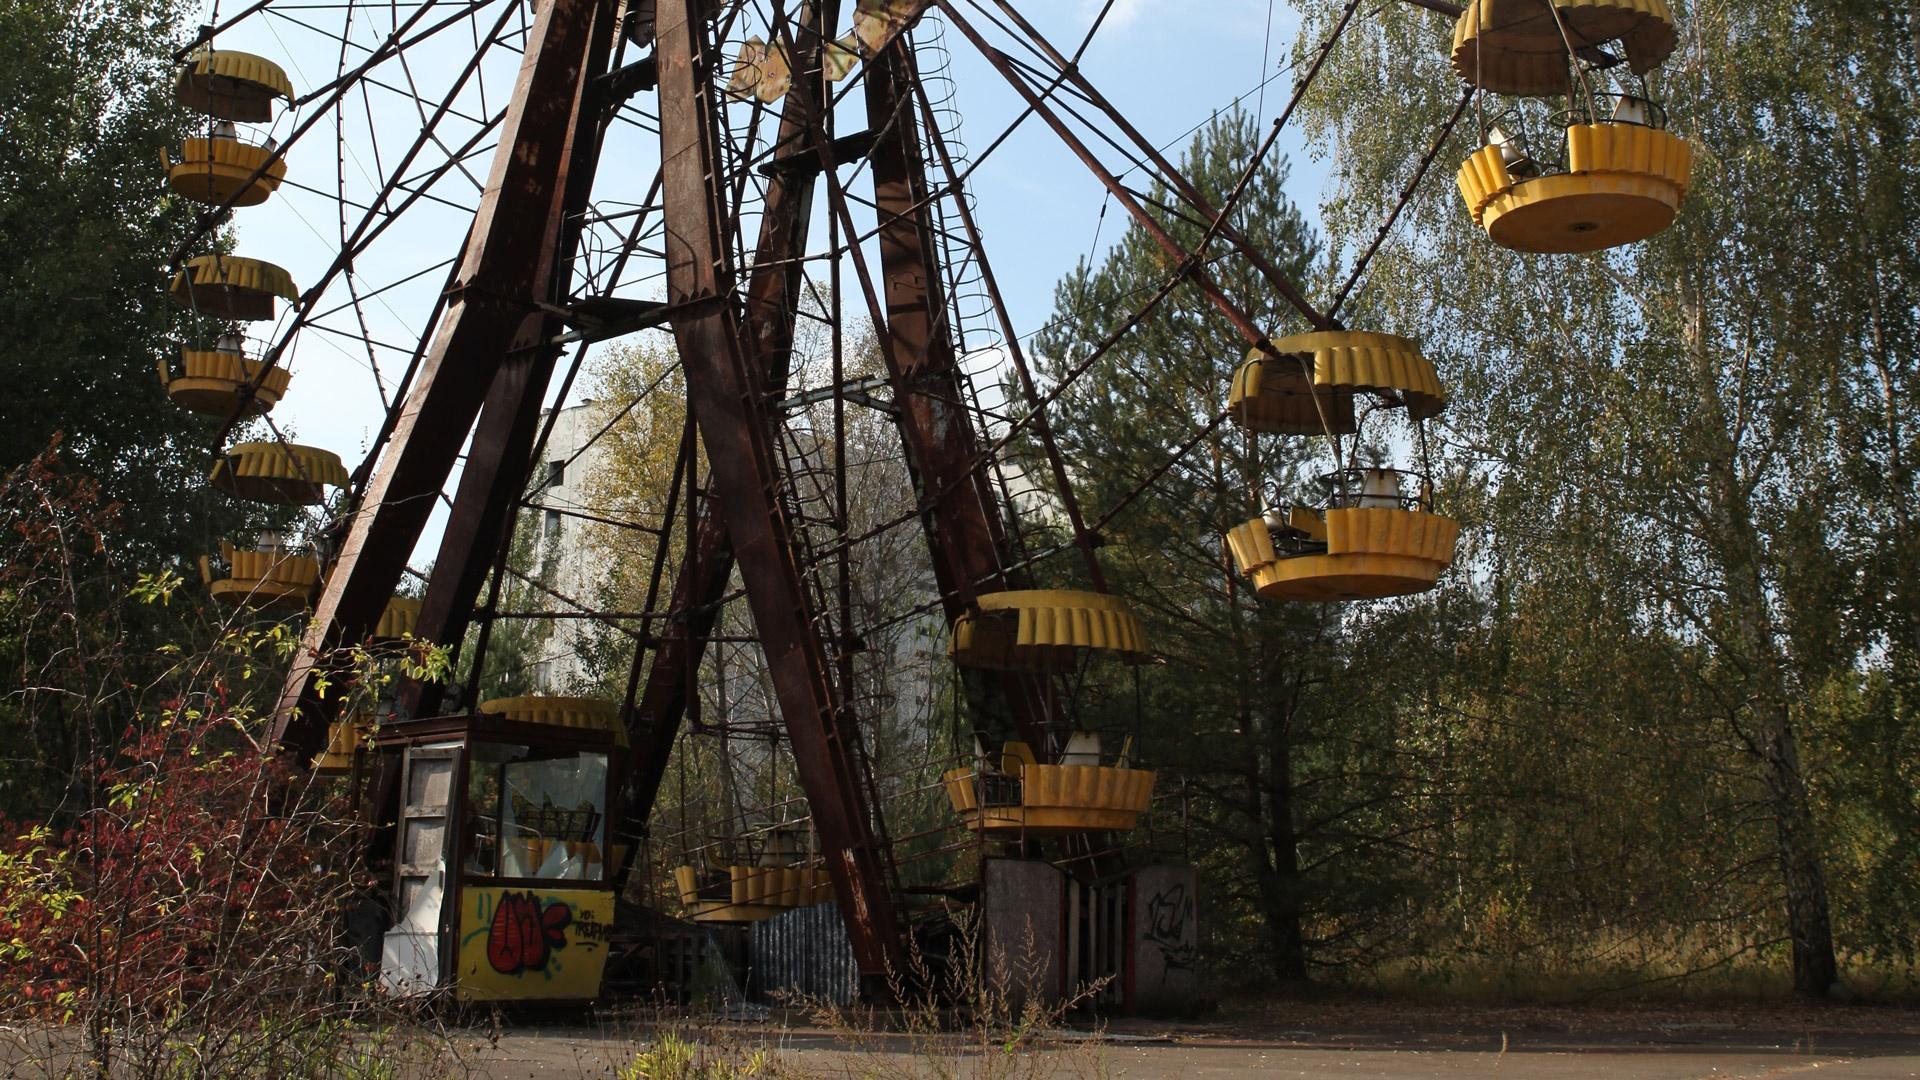 A ferris wheel in the abandoned city of Prypiat, Chernobyl, Ukraine.